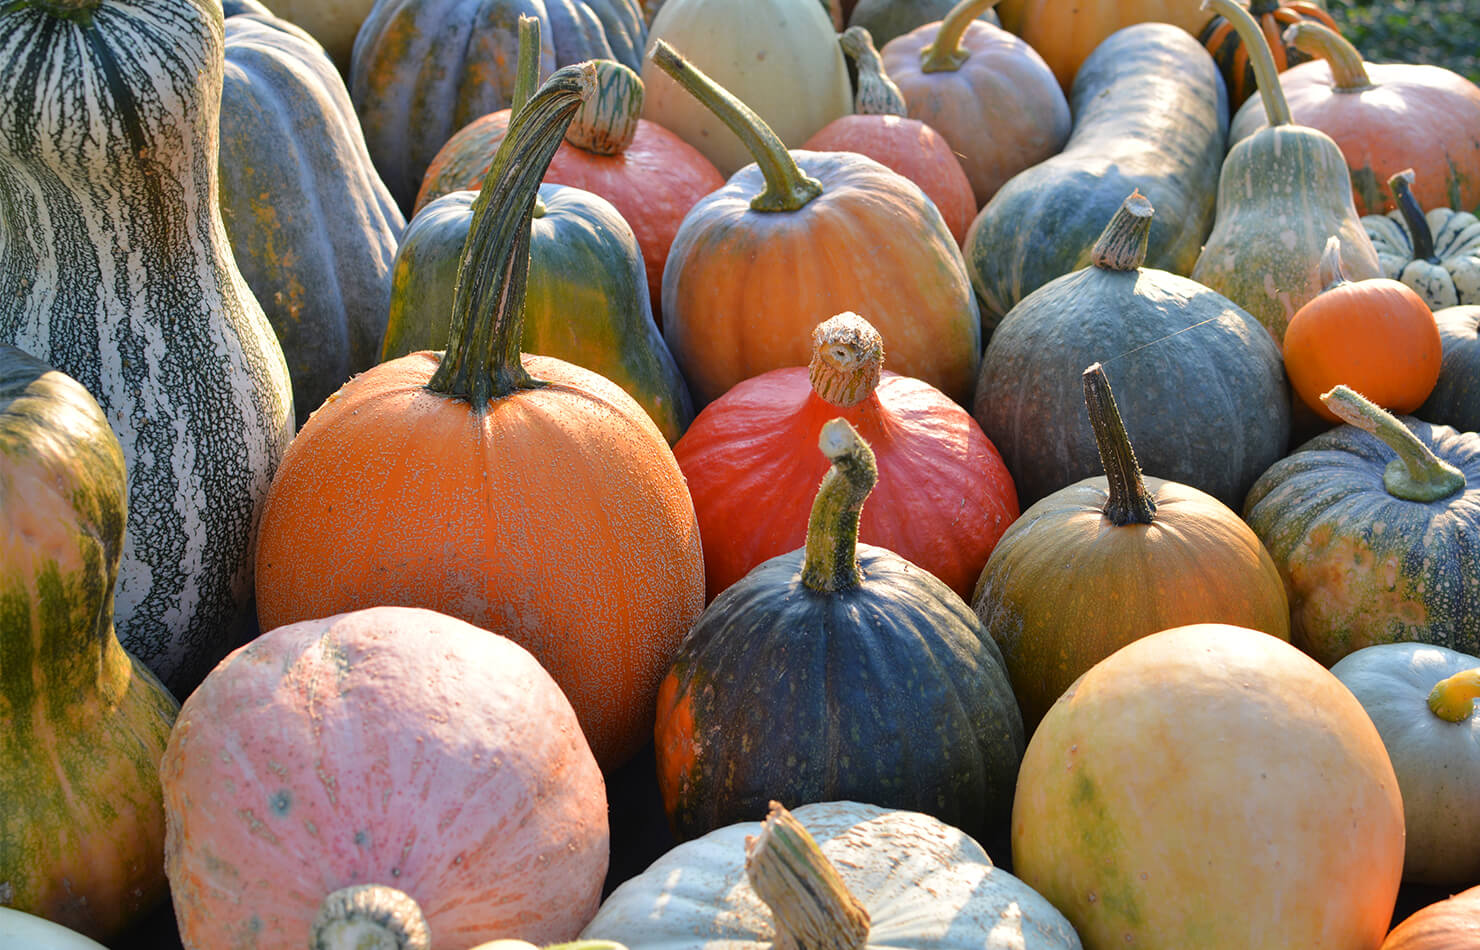 Pumpkins of different sizes and colors.